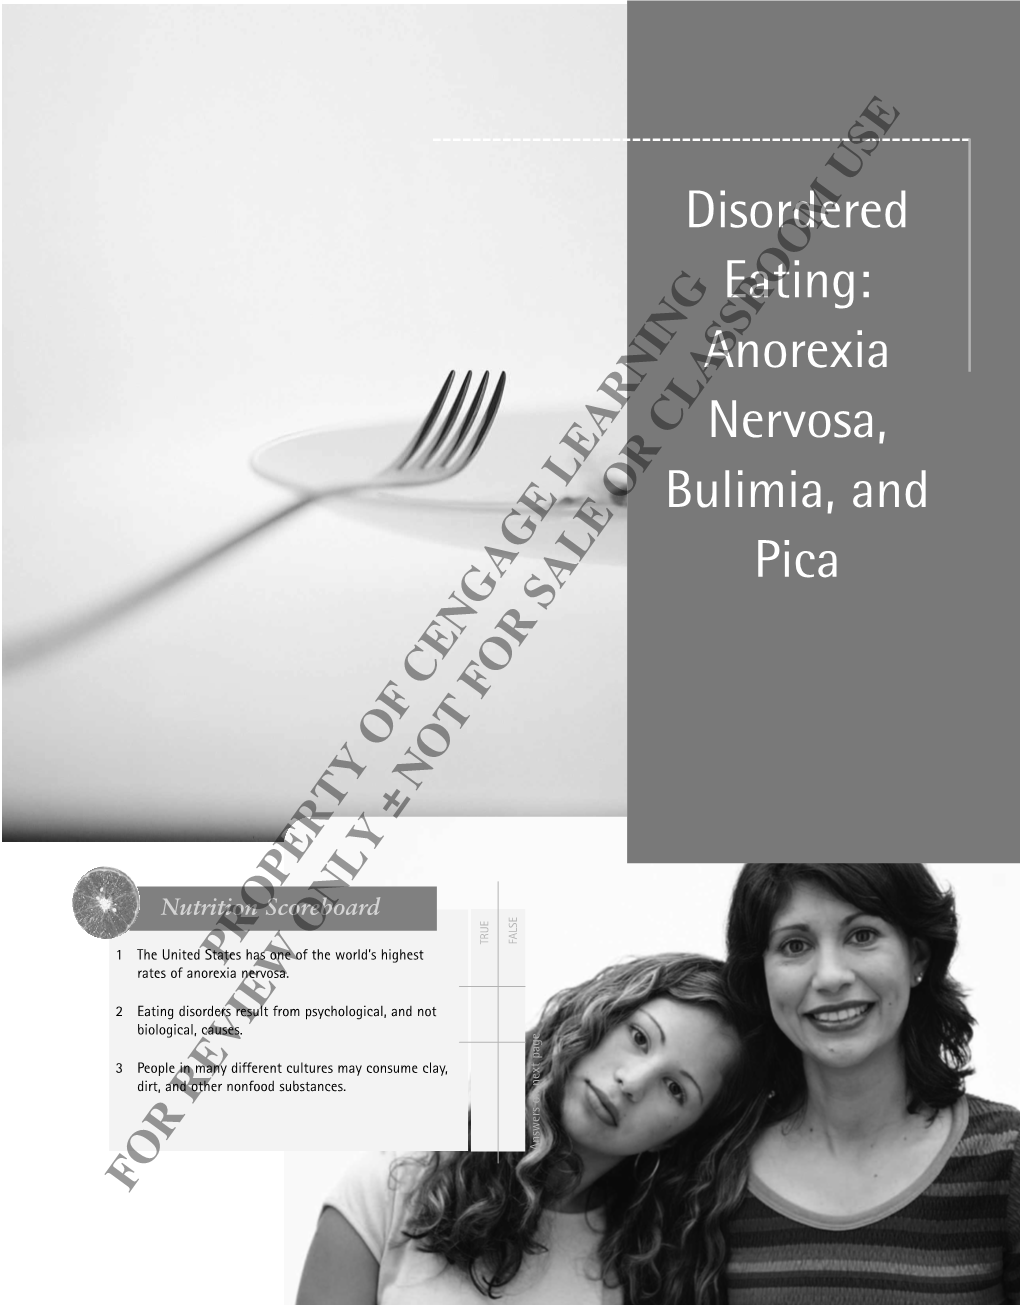 Disordered Eating: Anorexia Nervosa, Bulimia, and Pica